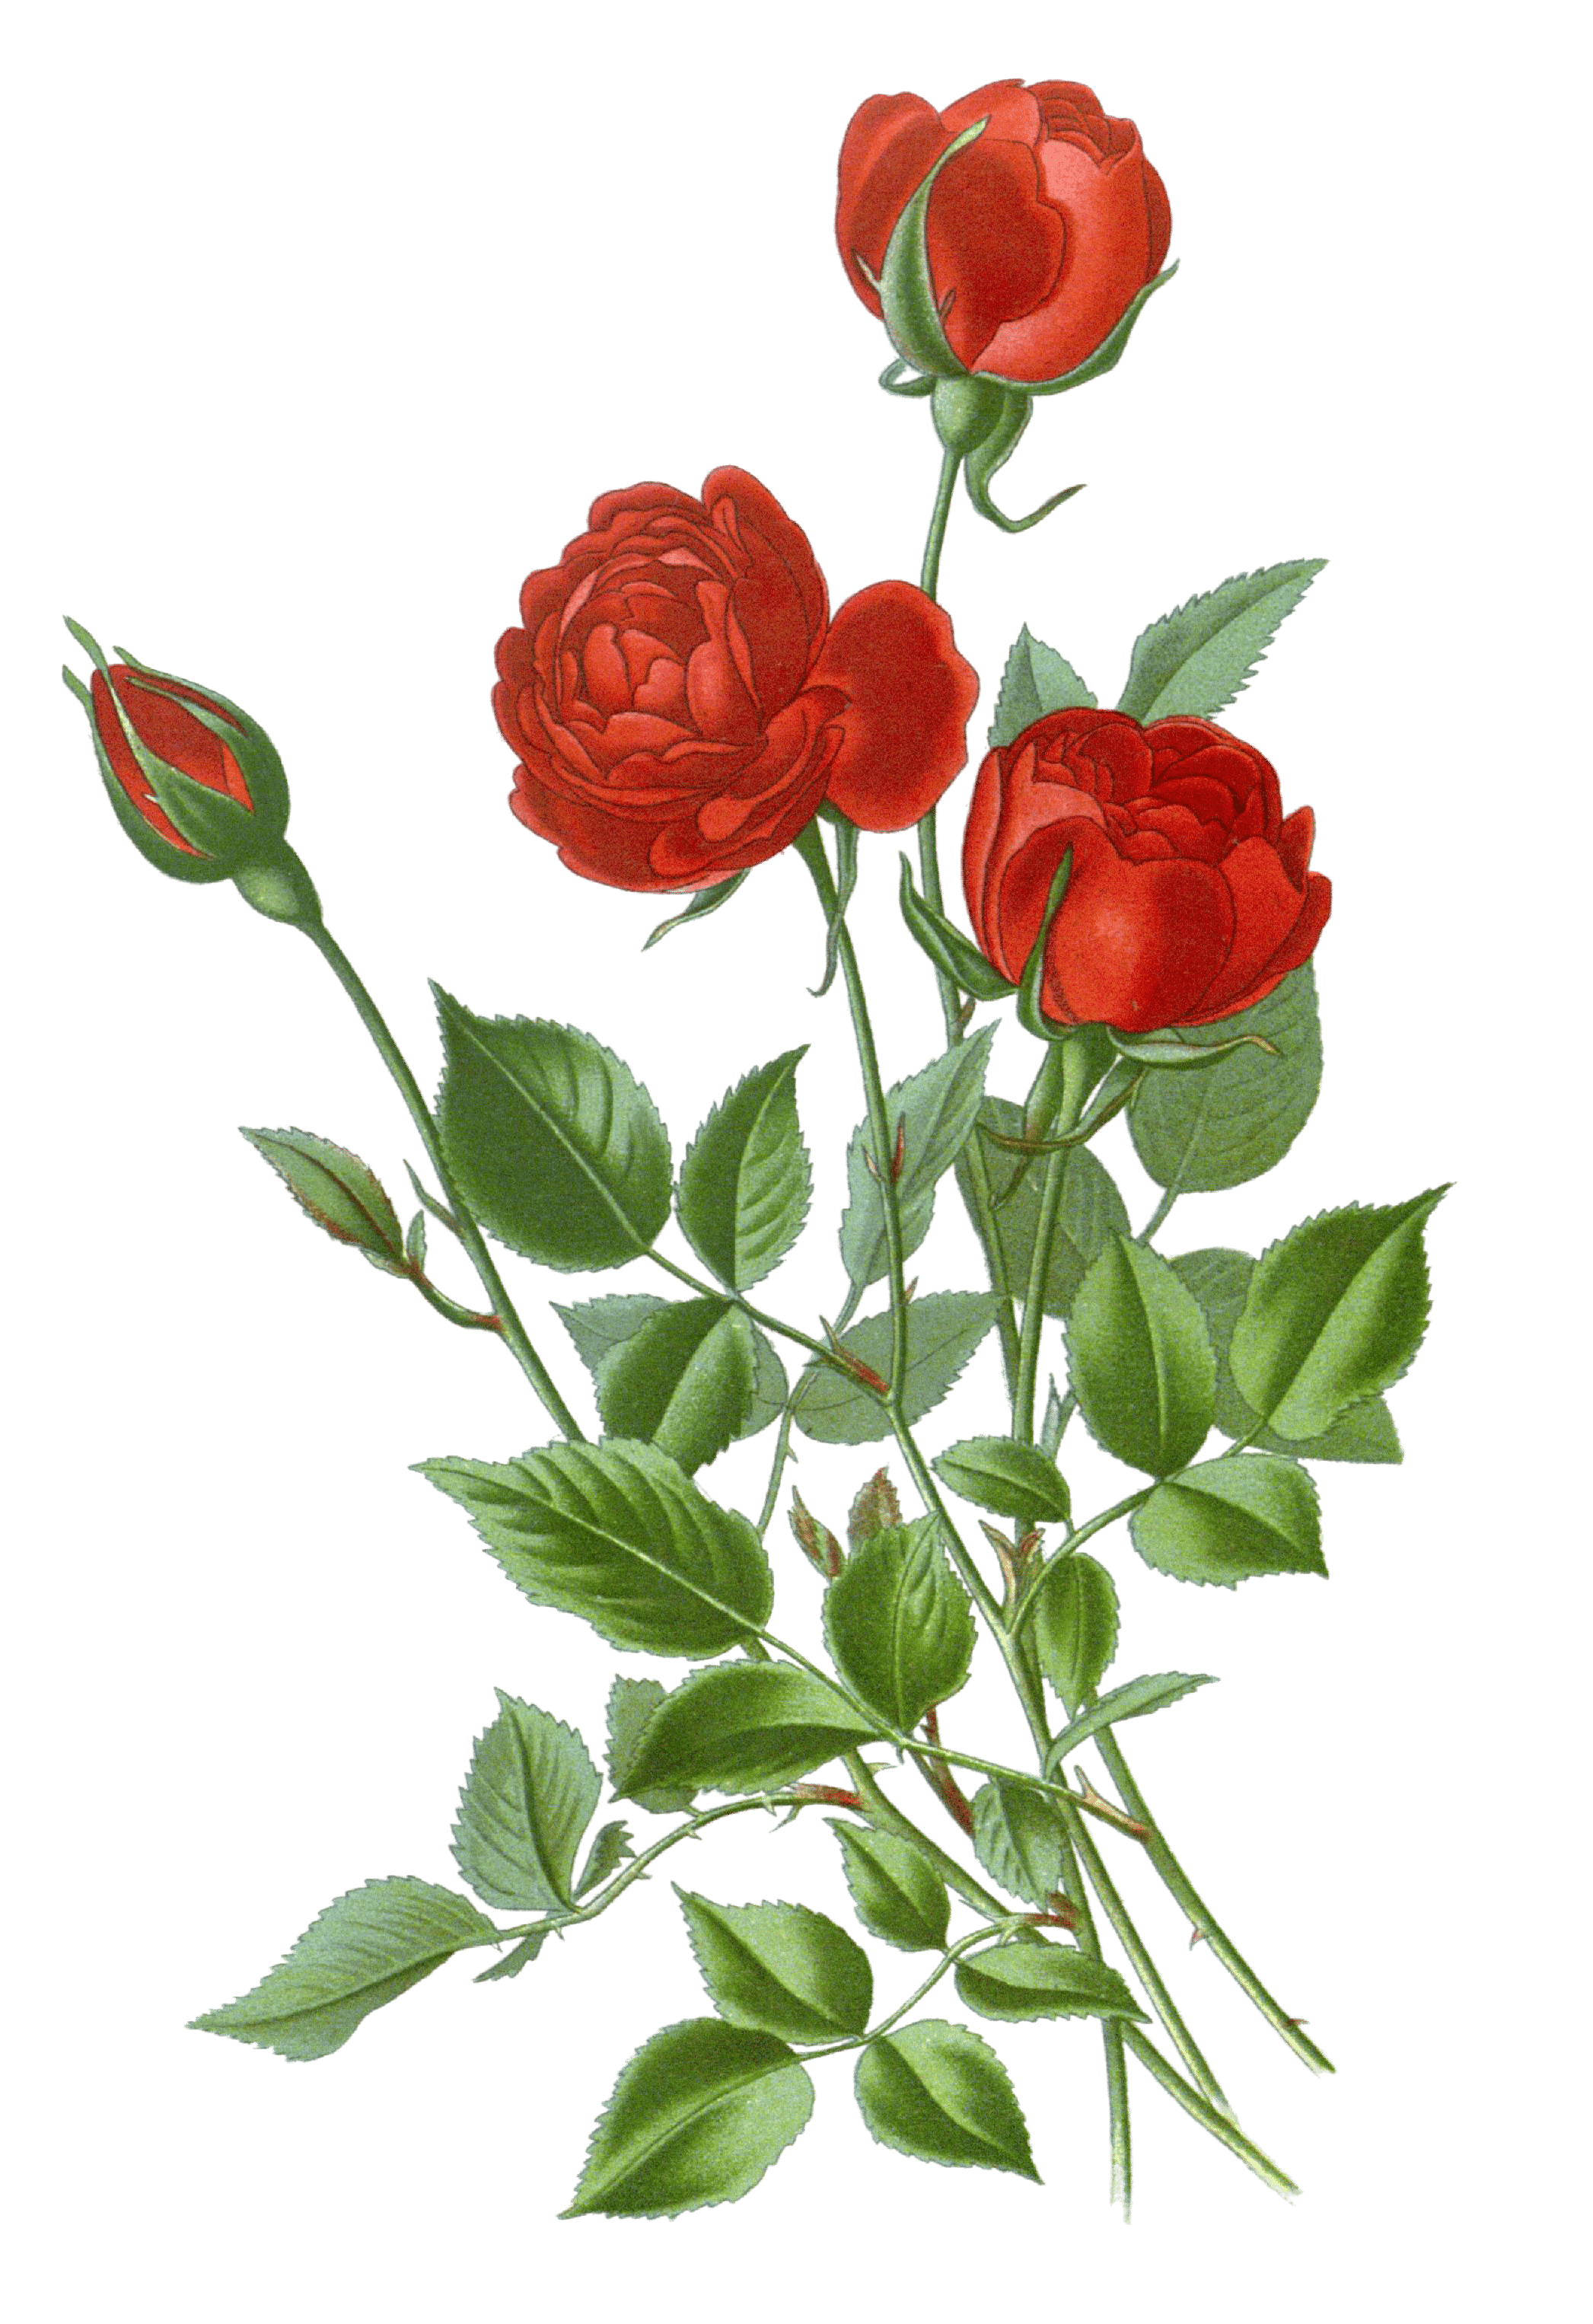 Red rose with buds